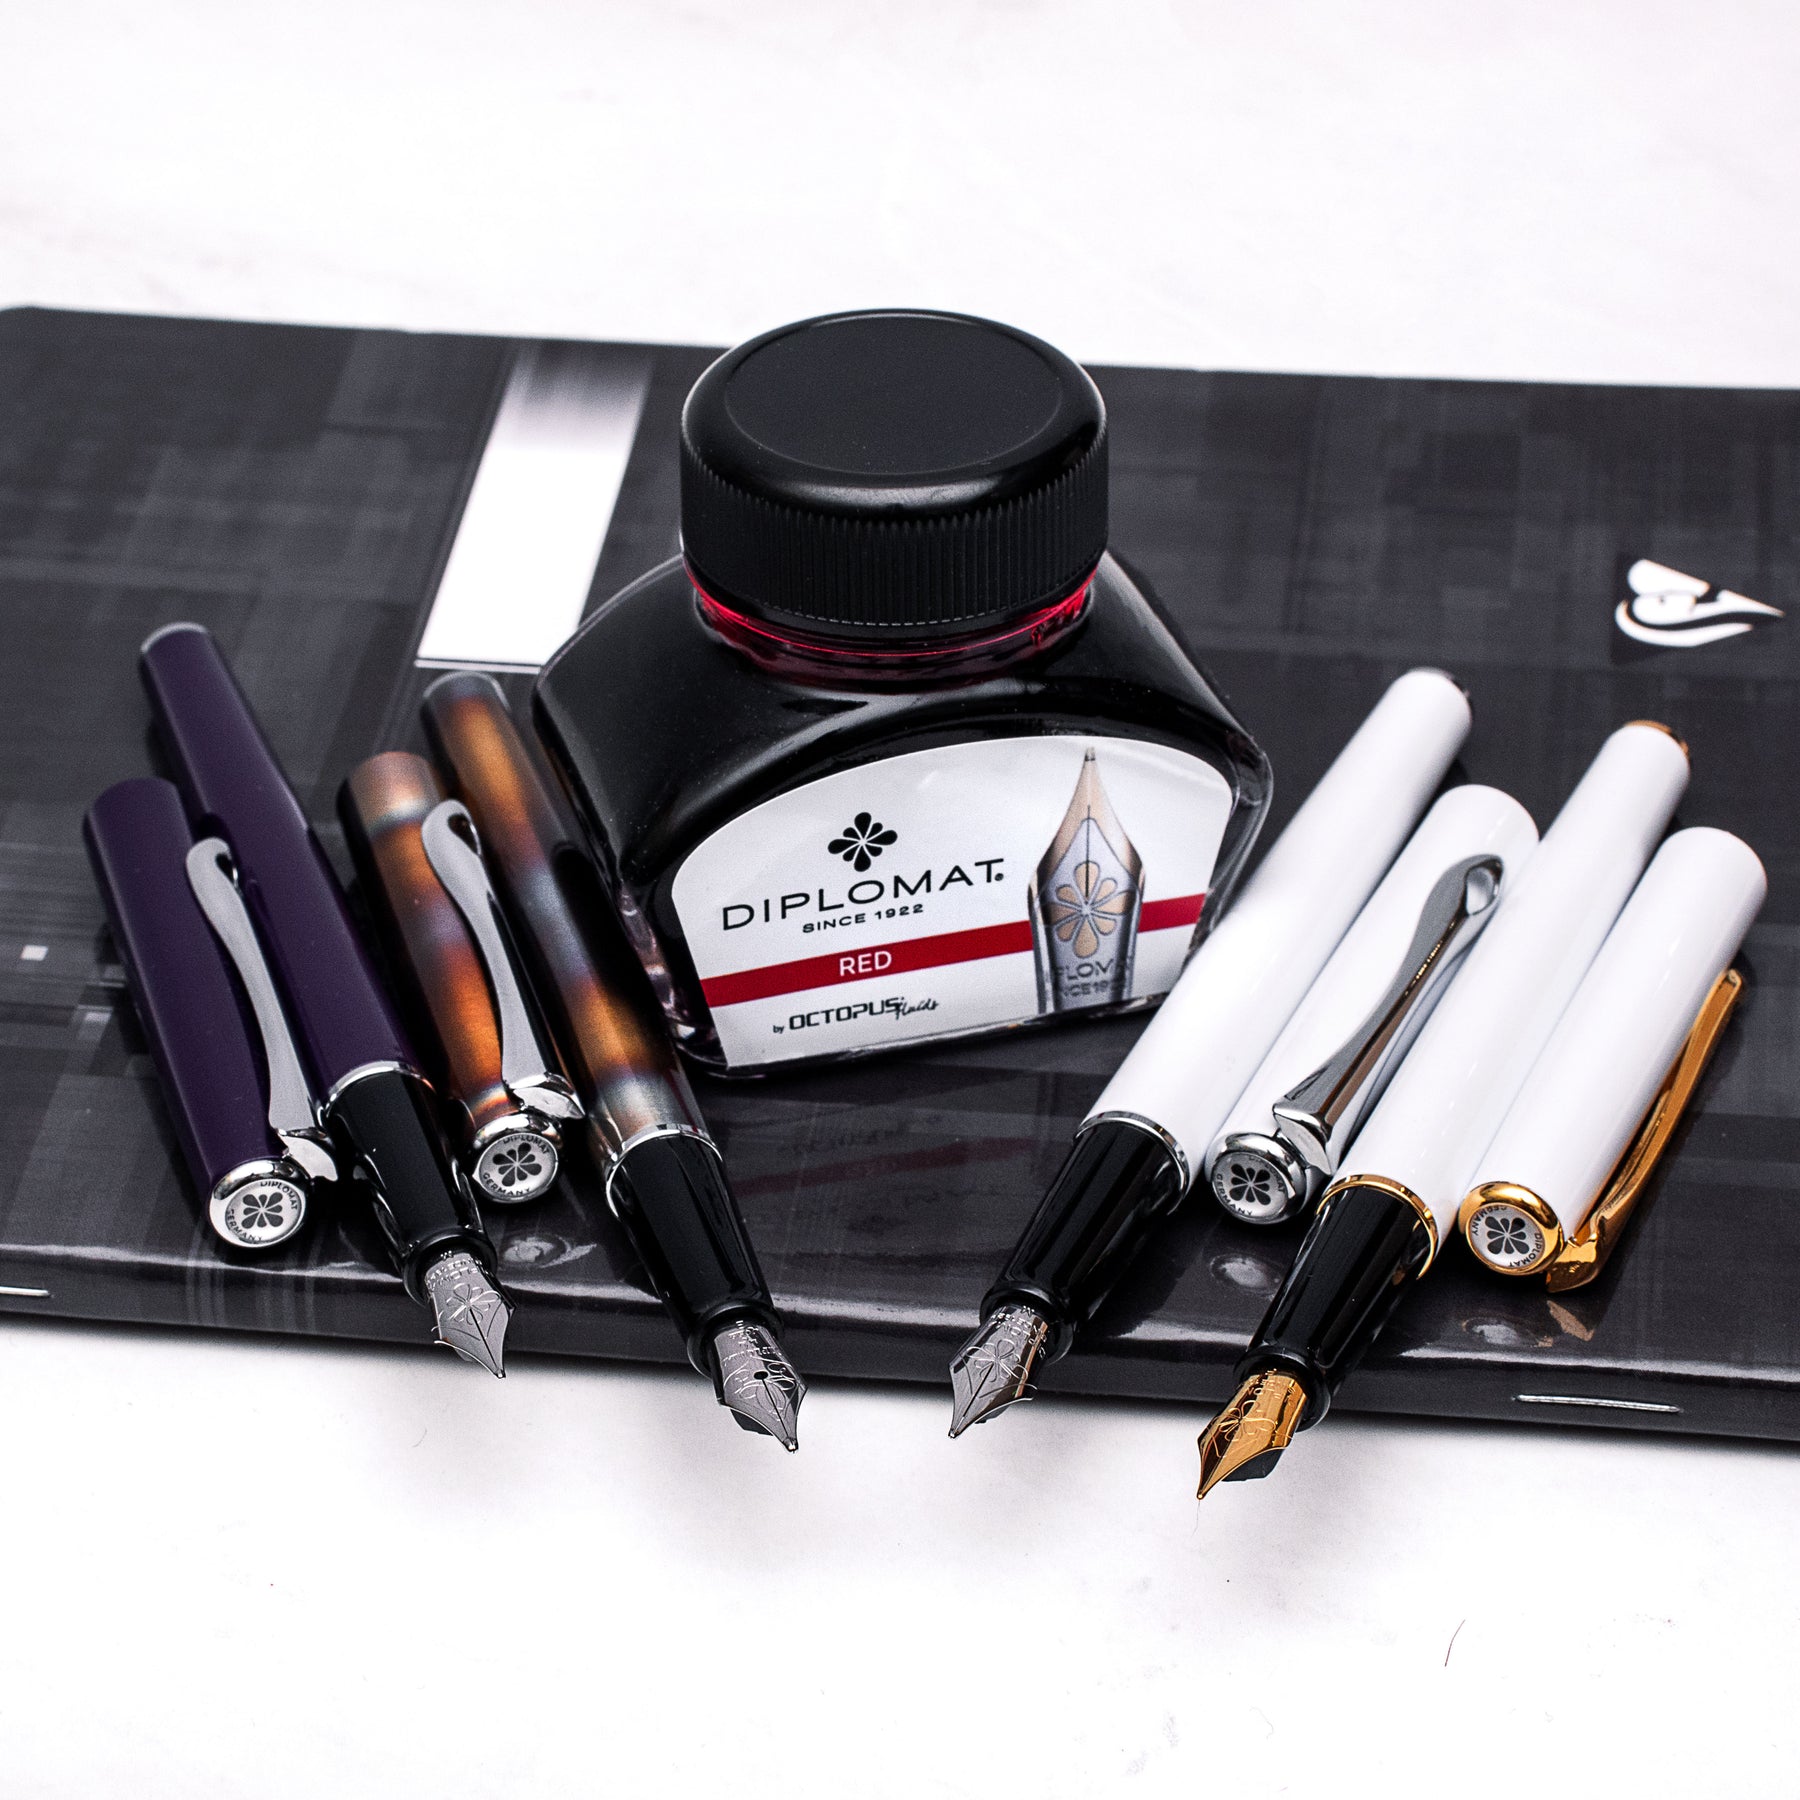 How to Write With a Fountain Pen: Step-by-Step Tutorial – Truphae